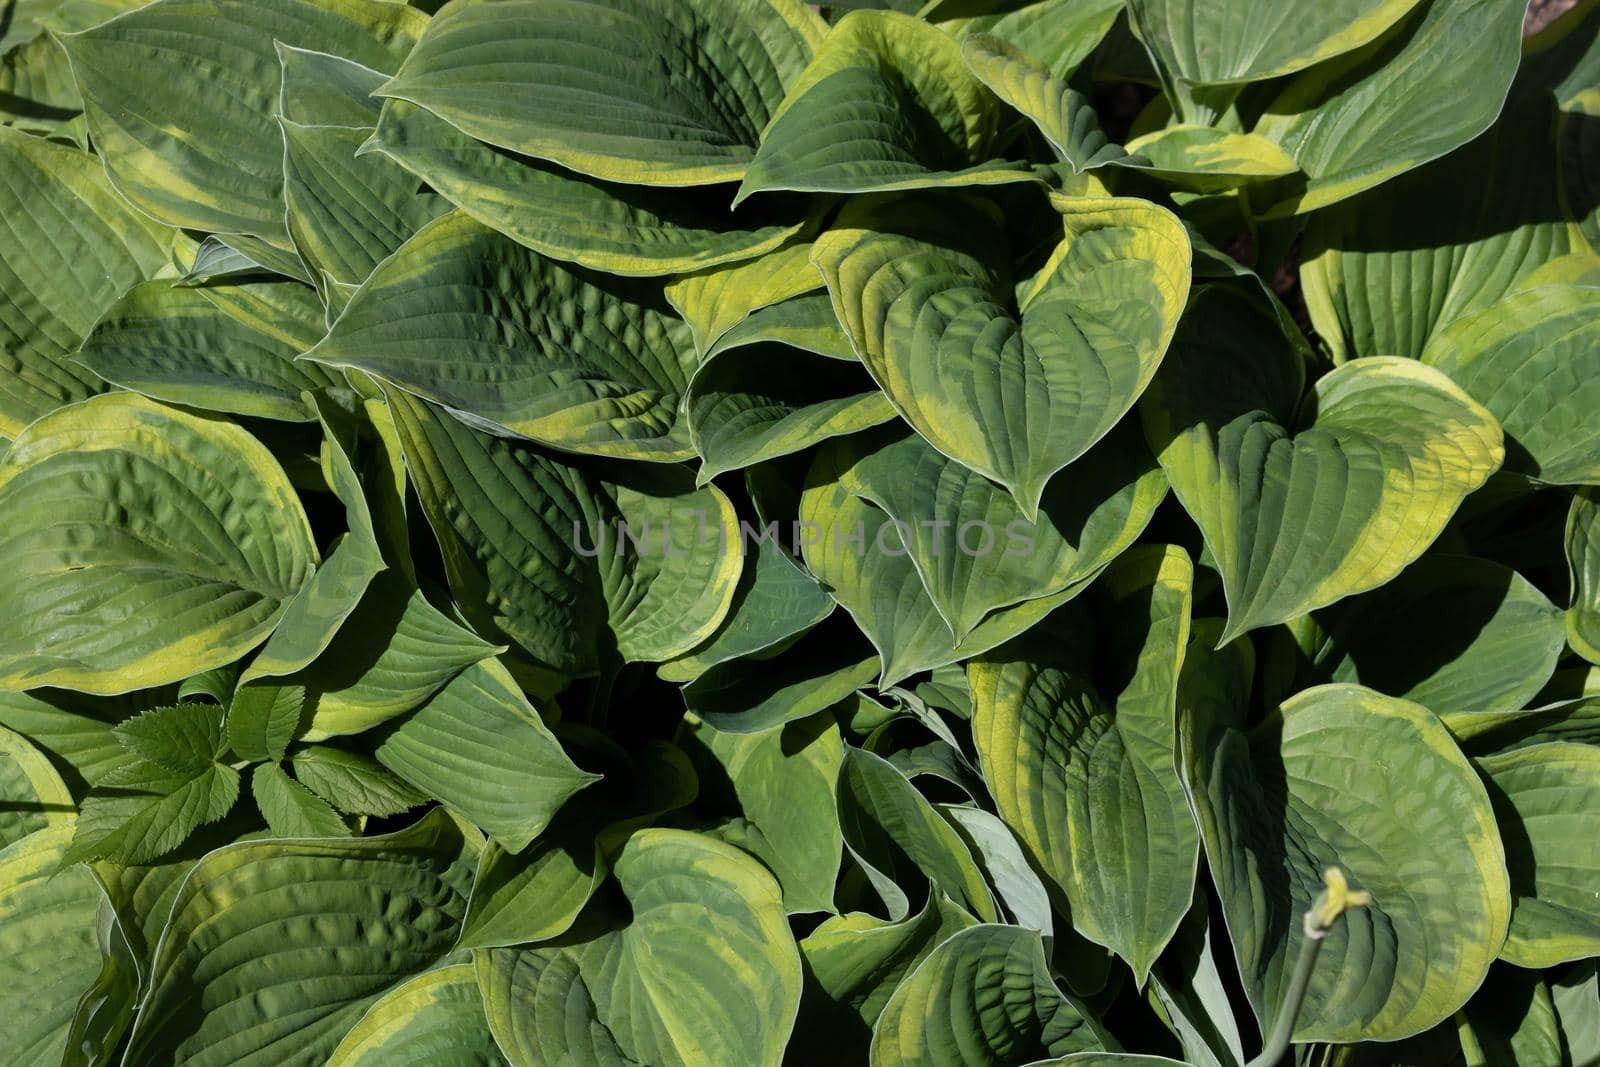 Large green leaves of the perennial Hosta plant grow in a flower bed in the garden. Sunlight. Daylight. by lapushka62